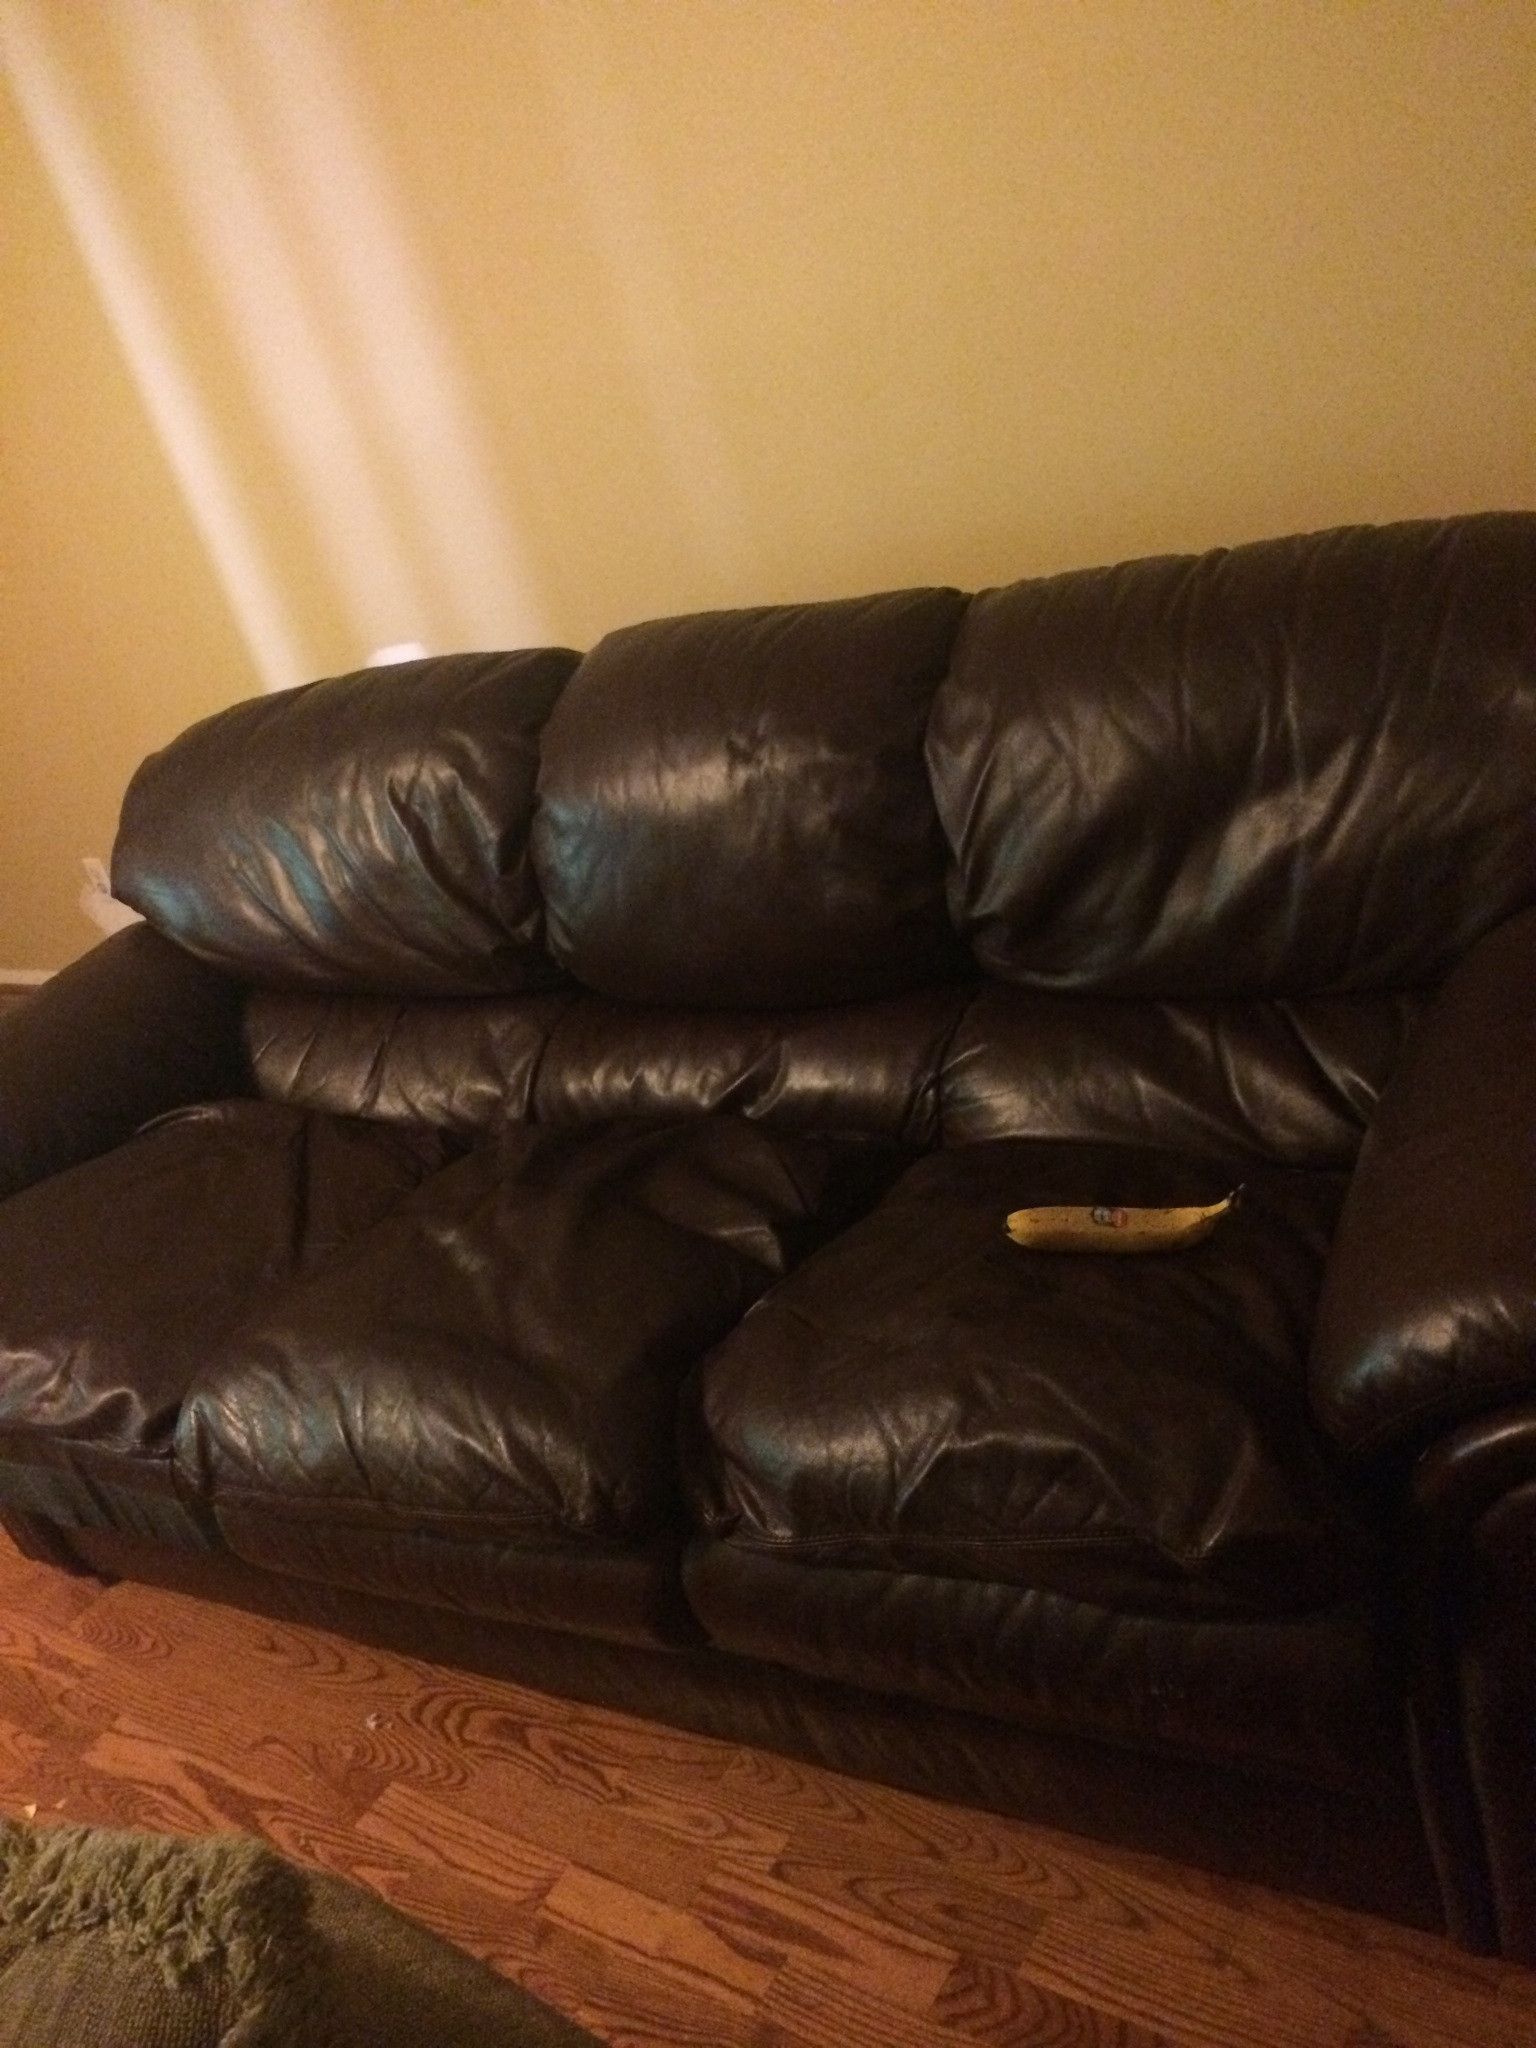 I Was Trying To Buy A Couch Off Of Craigslist And I Told Her I With Regard To Craigslist Leather Sofa (View 4 of 15)